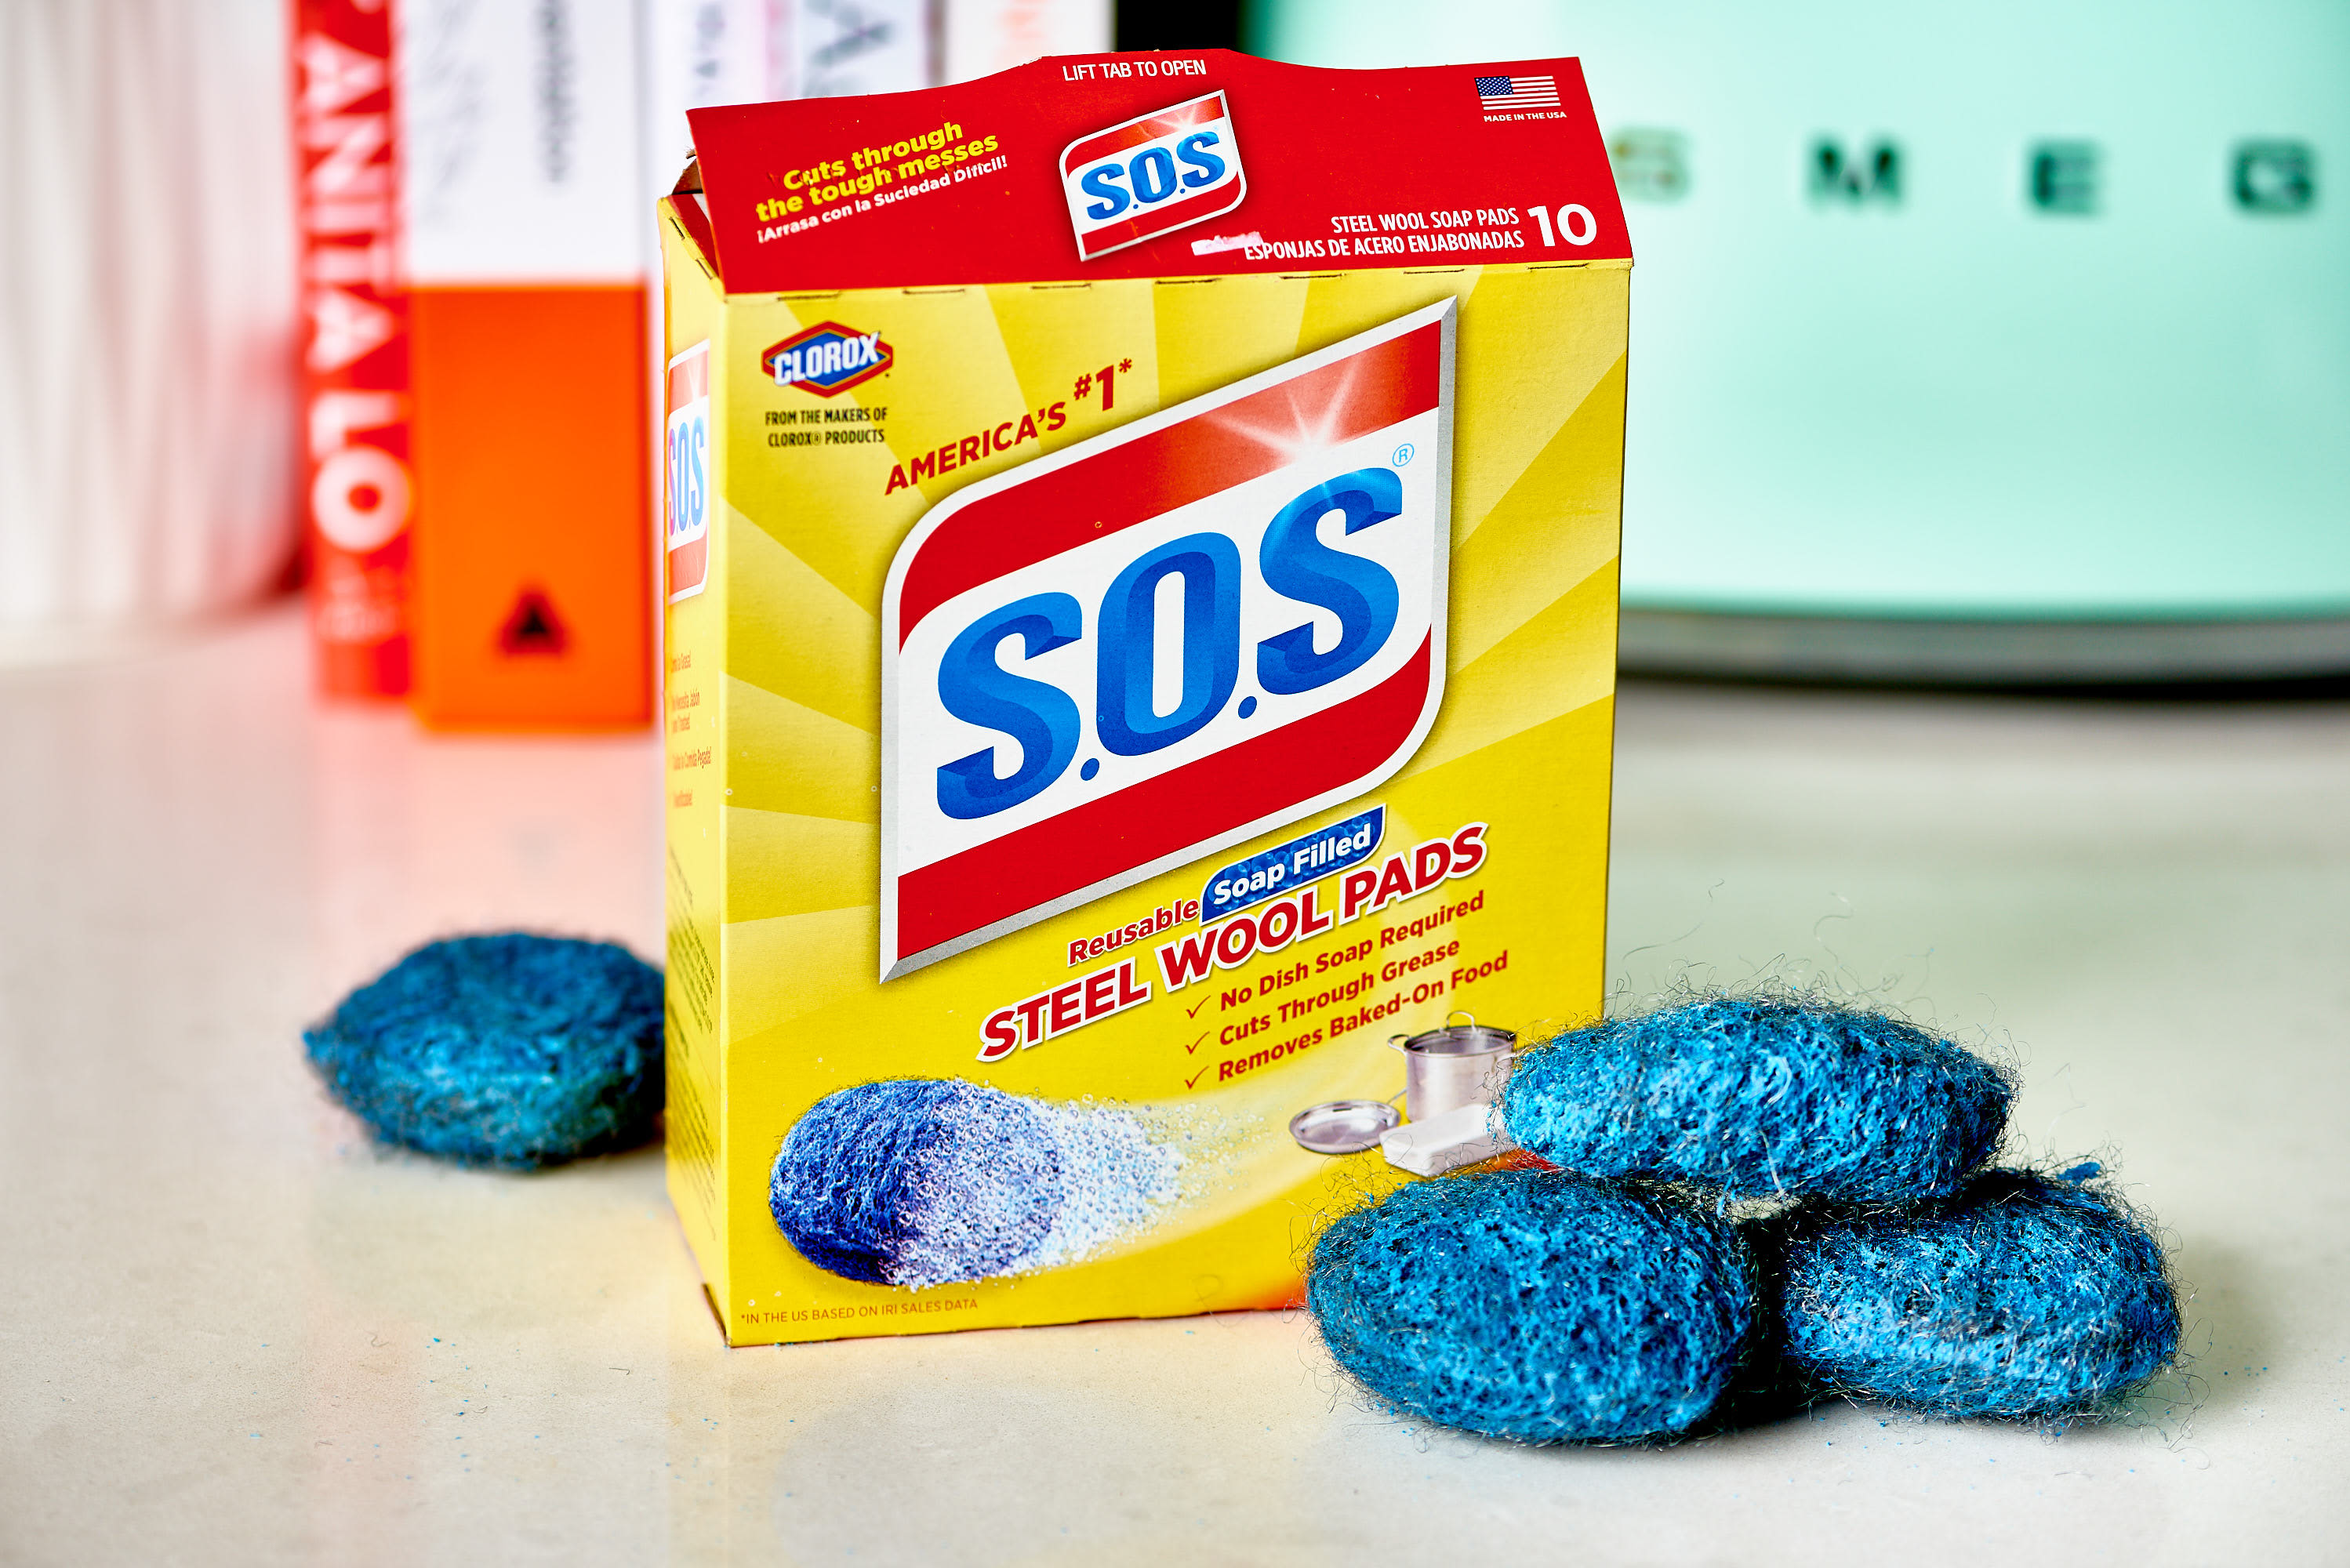 Brillo Steel Wool Scouring Soap Pad (18-Pack) in the Sponges & Scouring Pads  department at